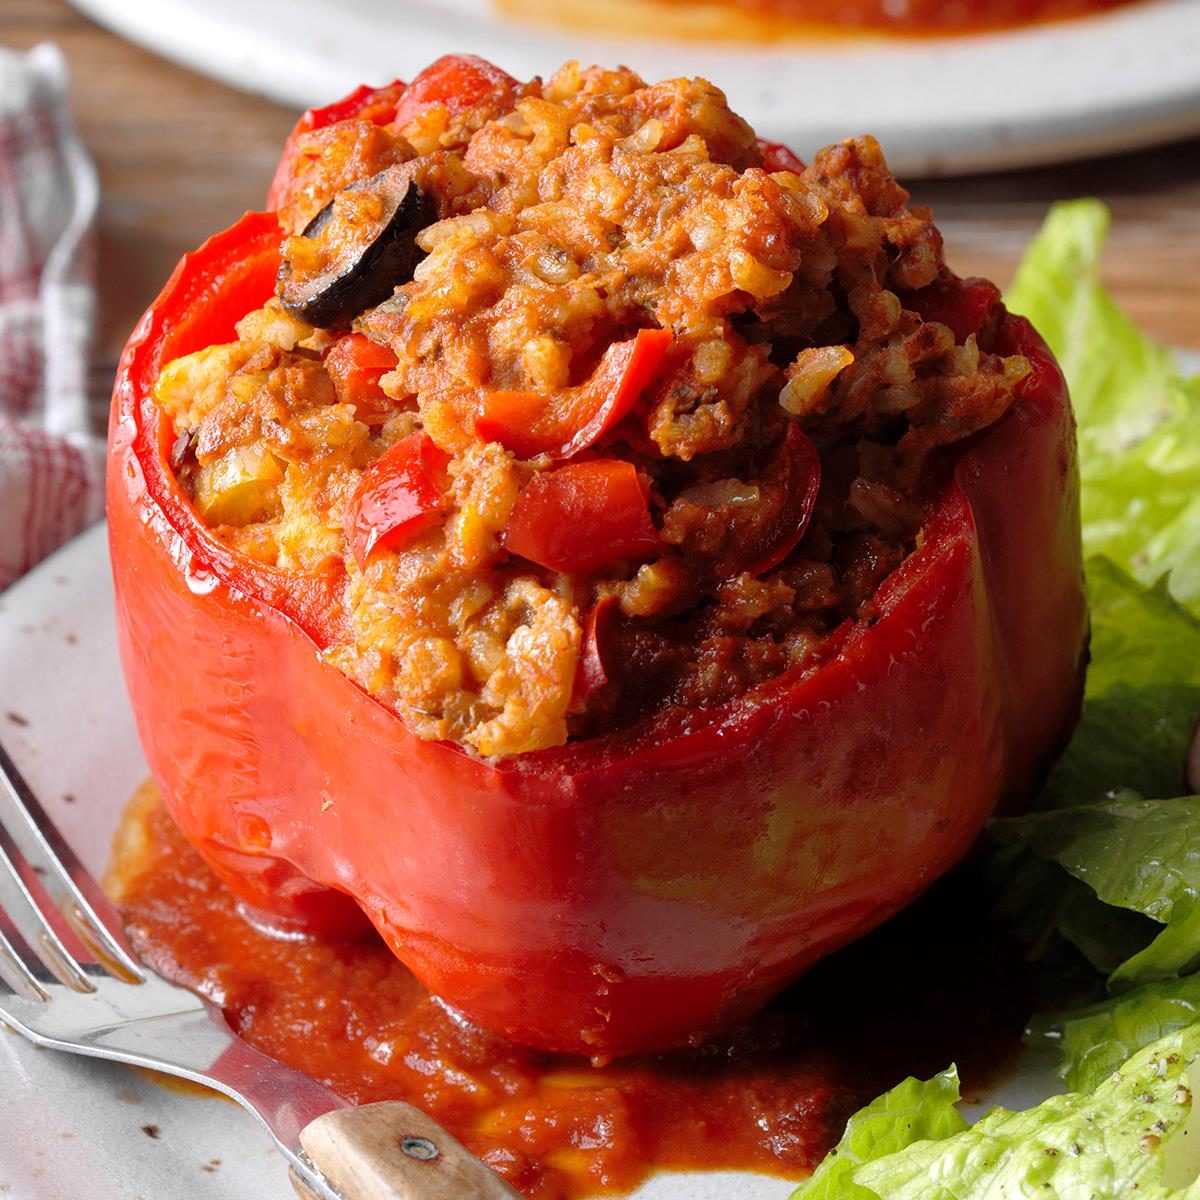 Day 18: Stuffed Sweet Peppers